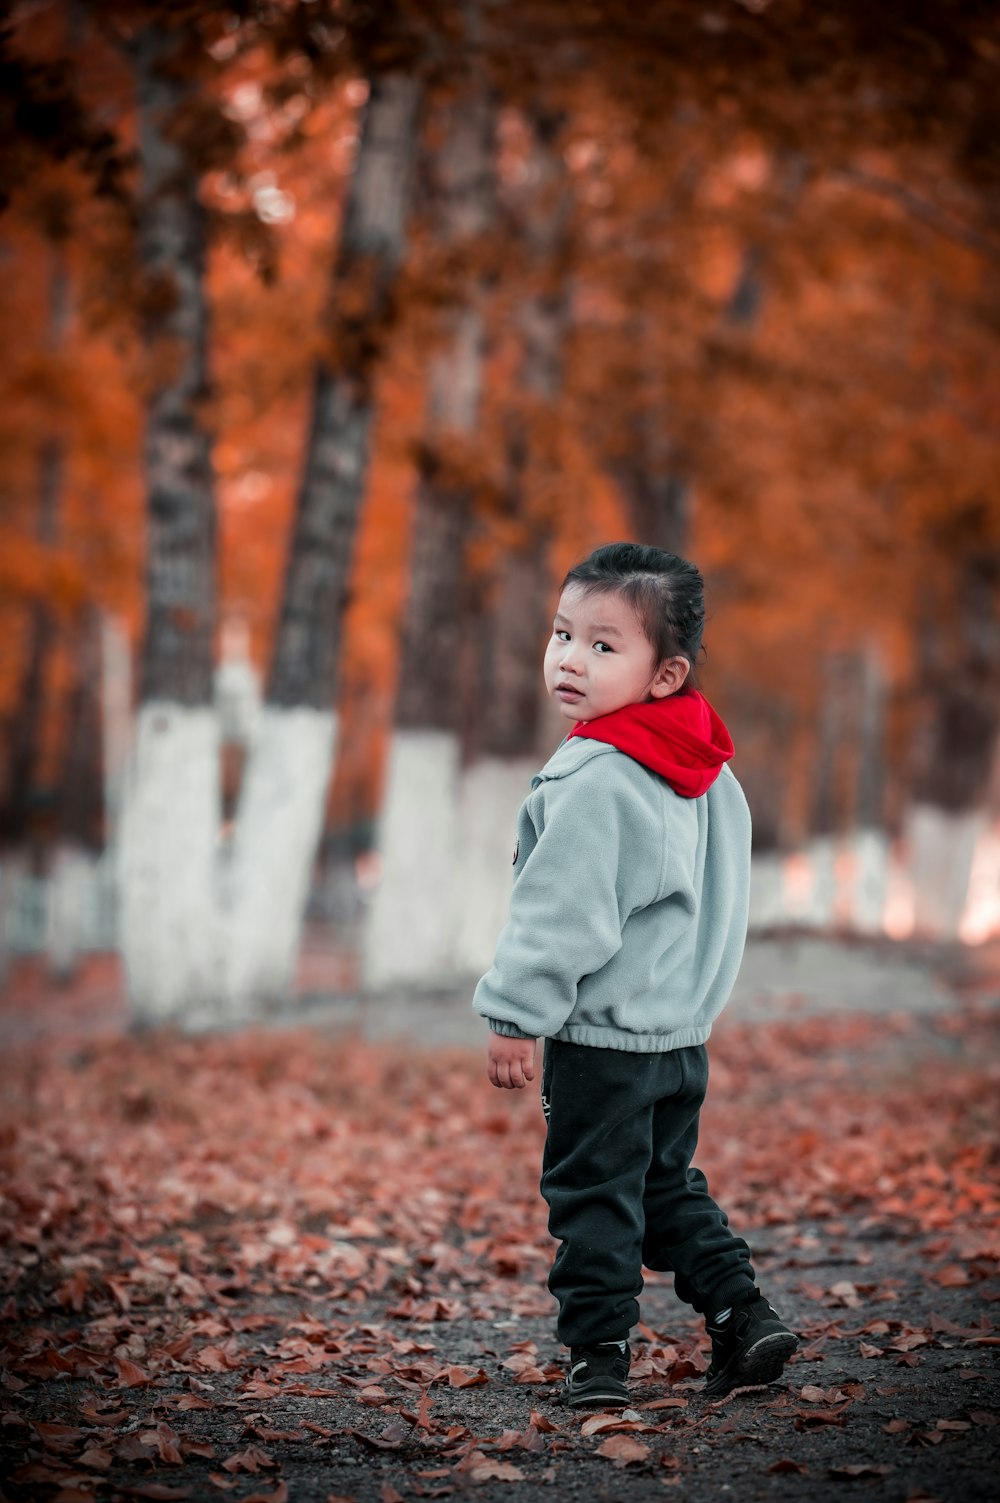 a young boy standing in a forest with leaves on the ground